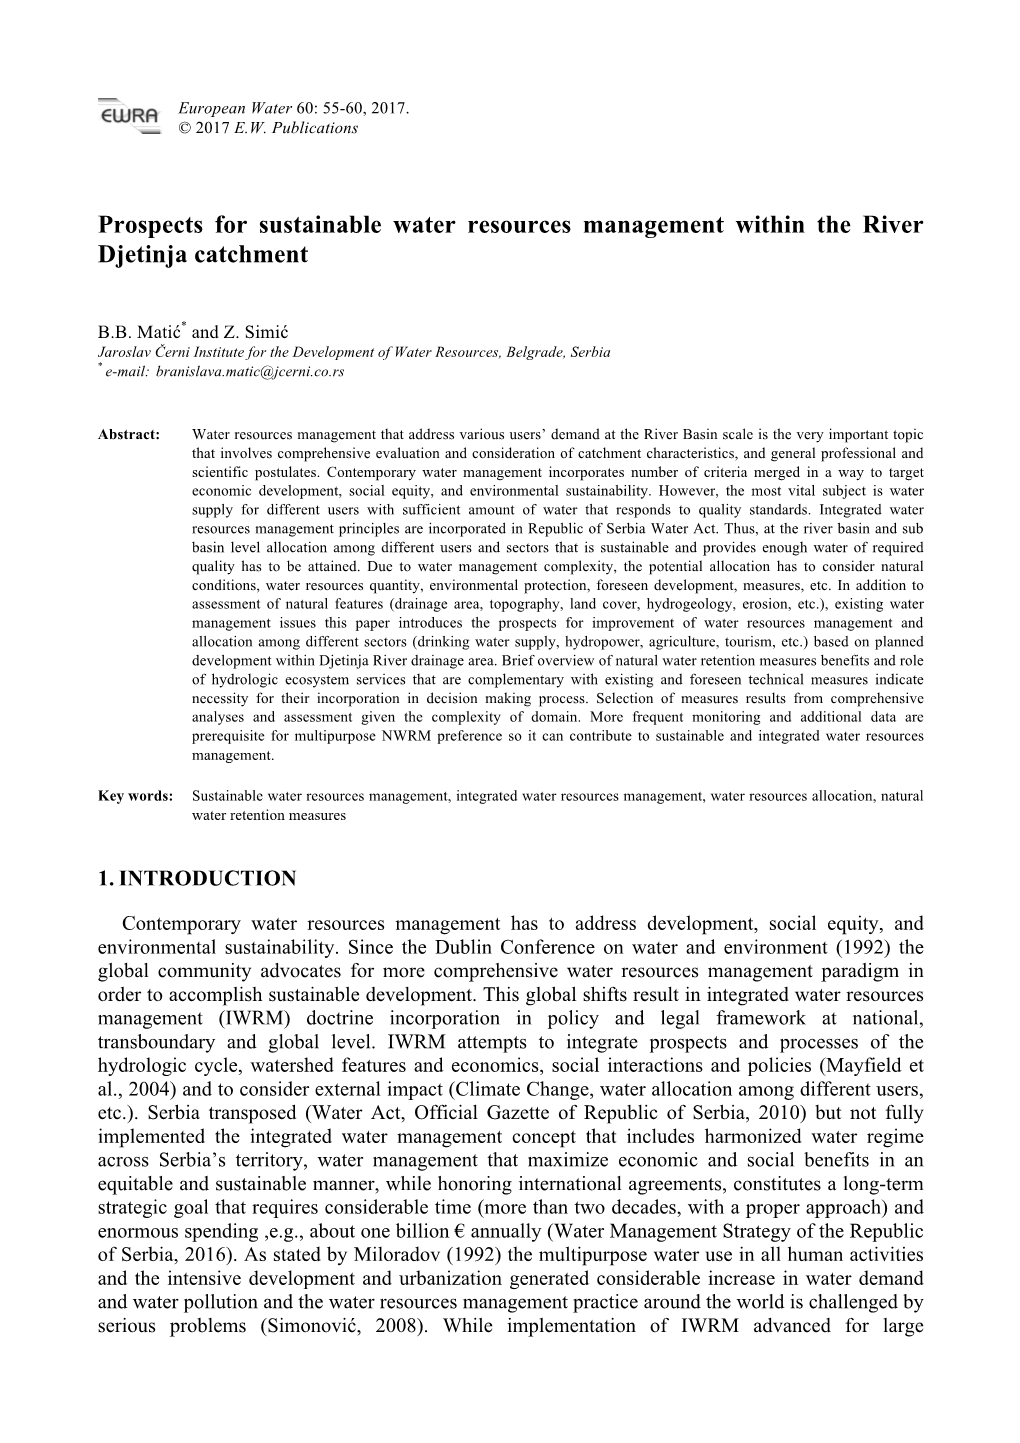 Prospects for Sustainable Water Resources Management Within the River Djetinja Catchment